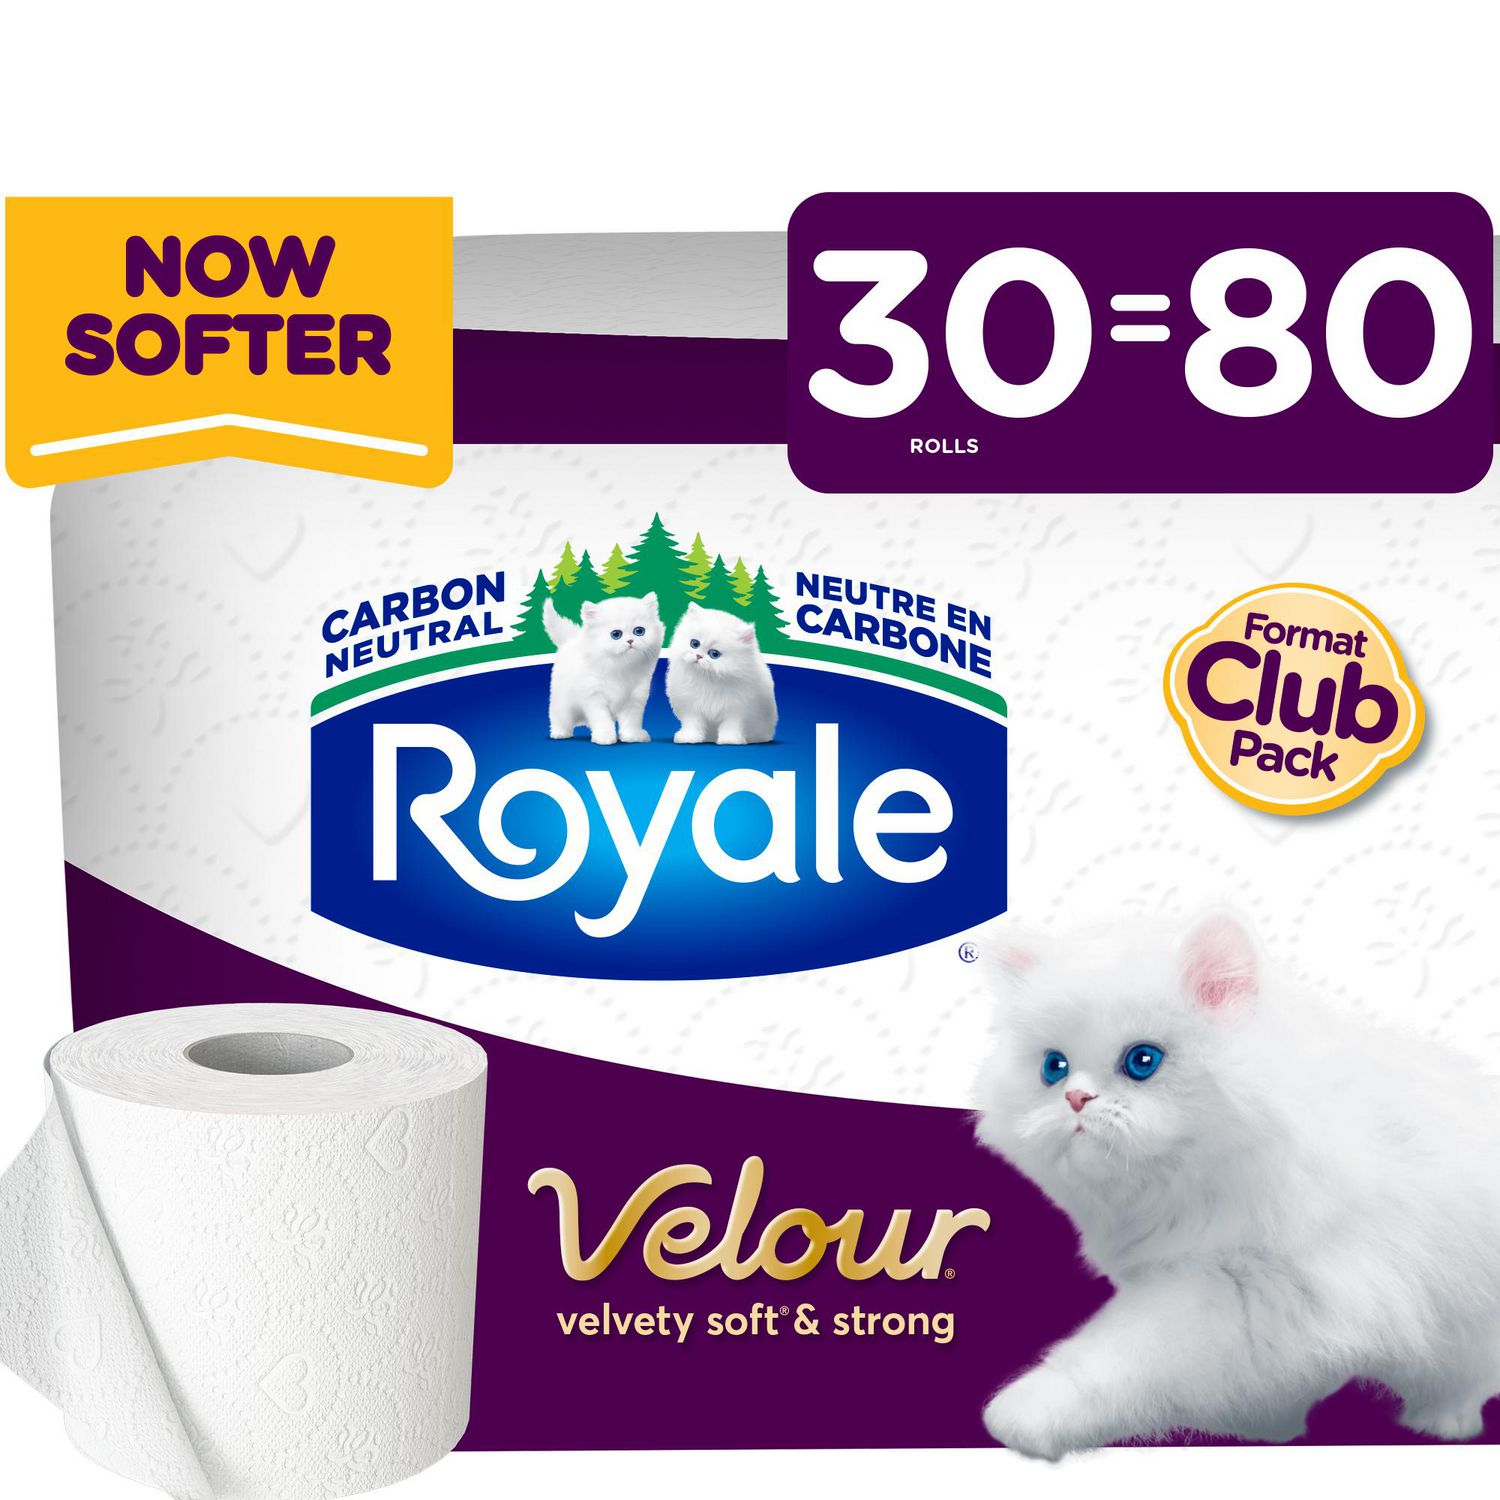 Royale Velour Toilet Paper, 30 equal 80 Rolls, 190 Sheets Per Roll, 190  tissues roll, 2-ply